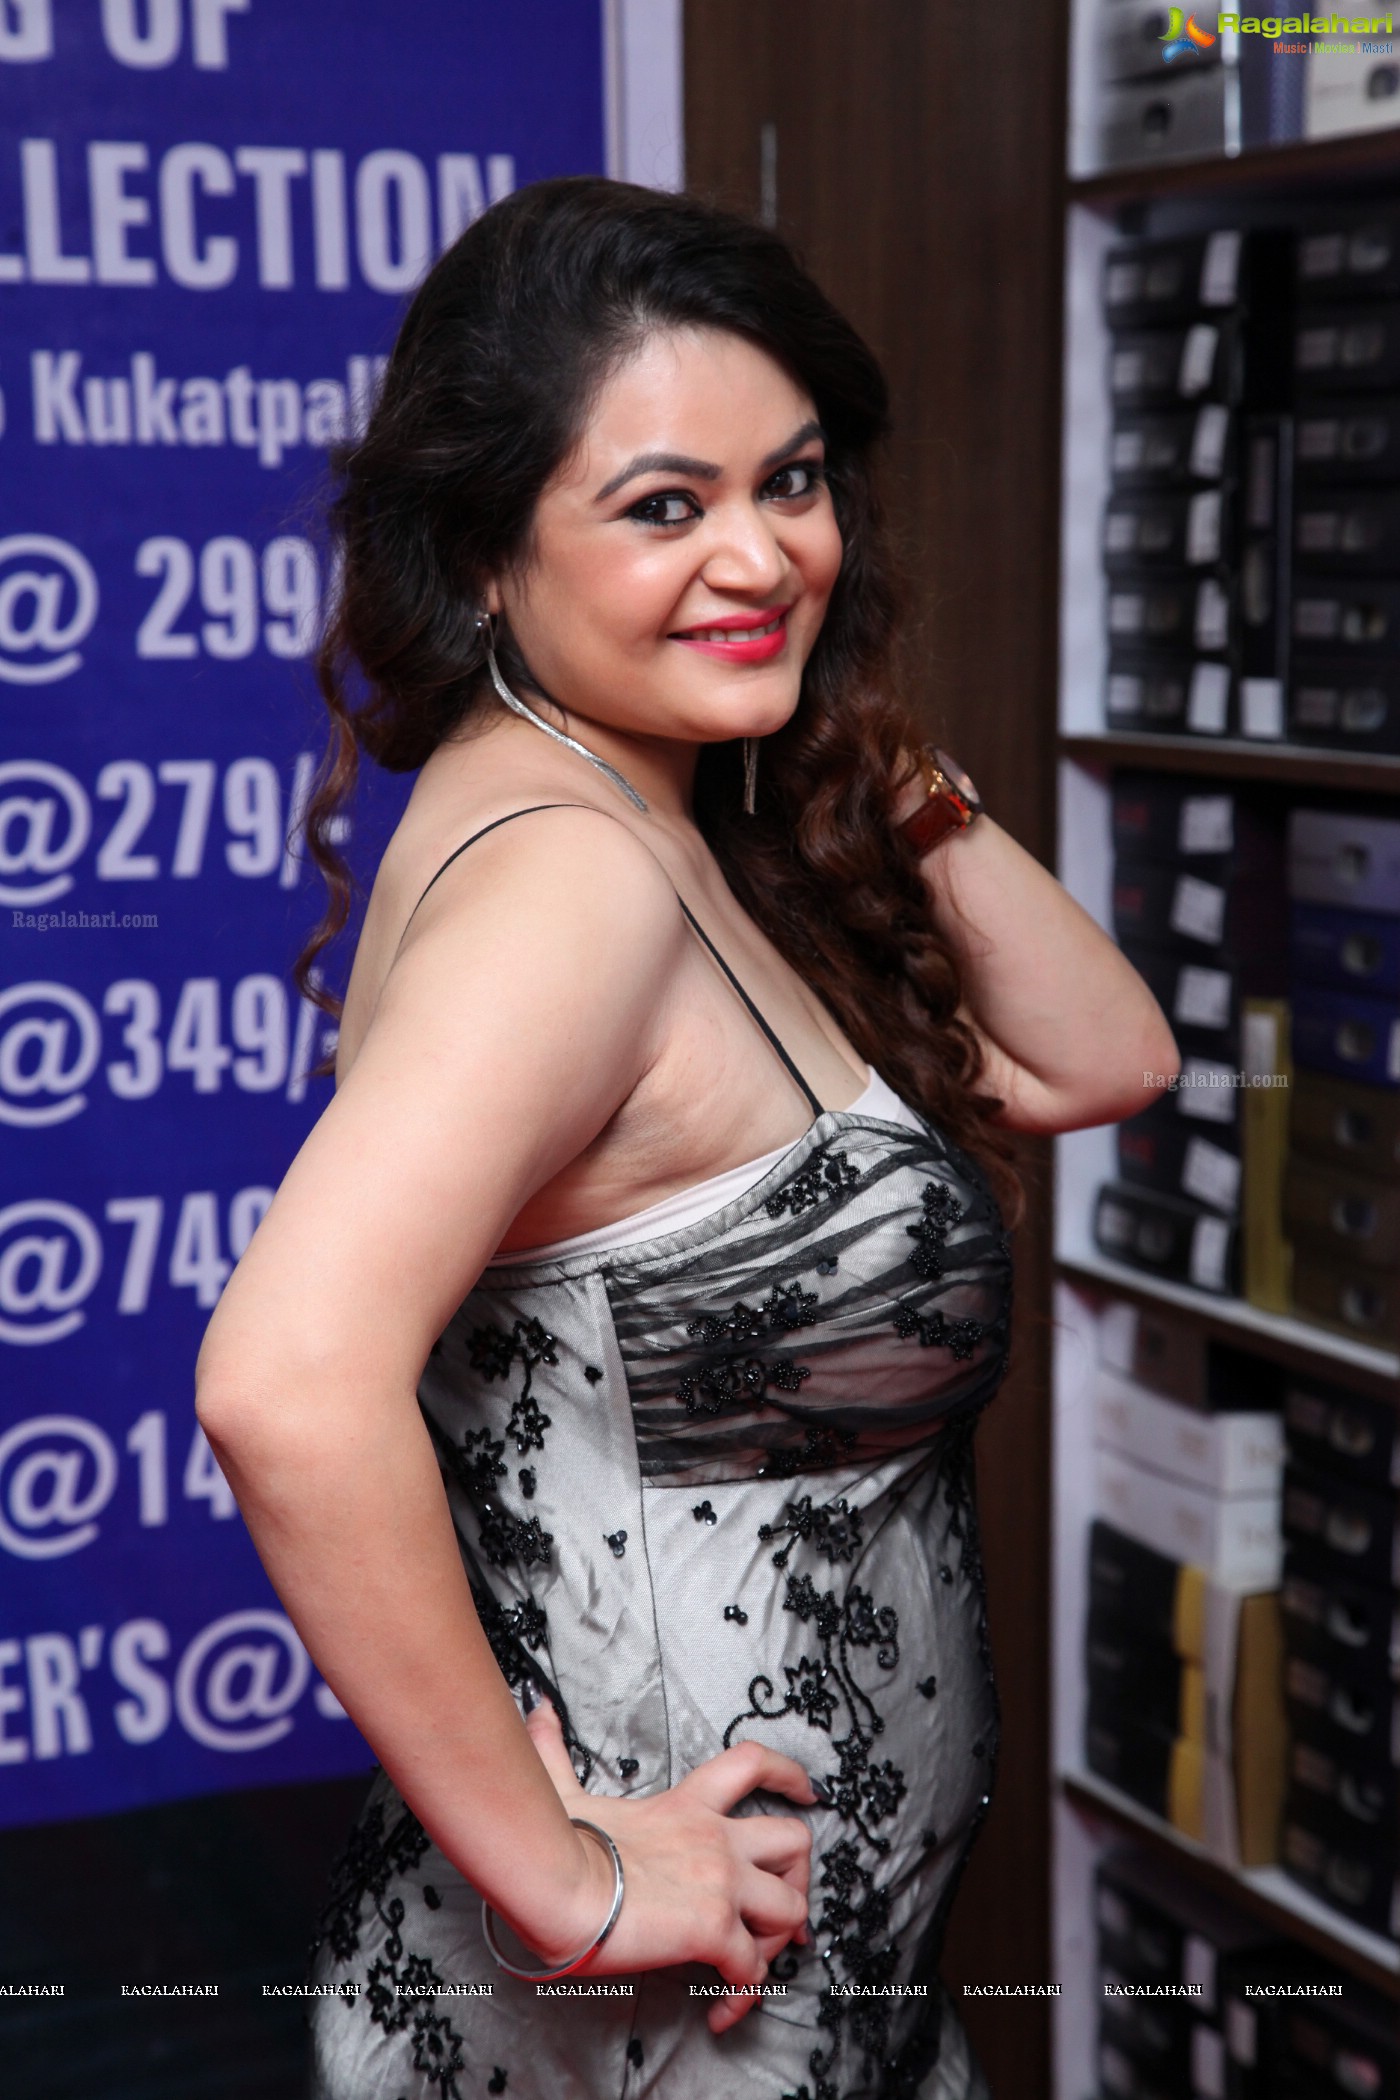 Akshitha Sethi at He's Collections (Posters)